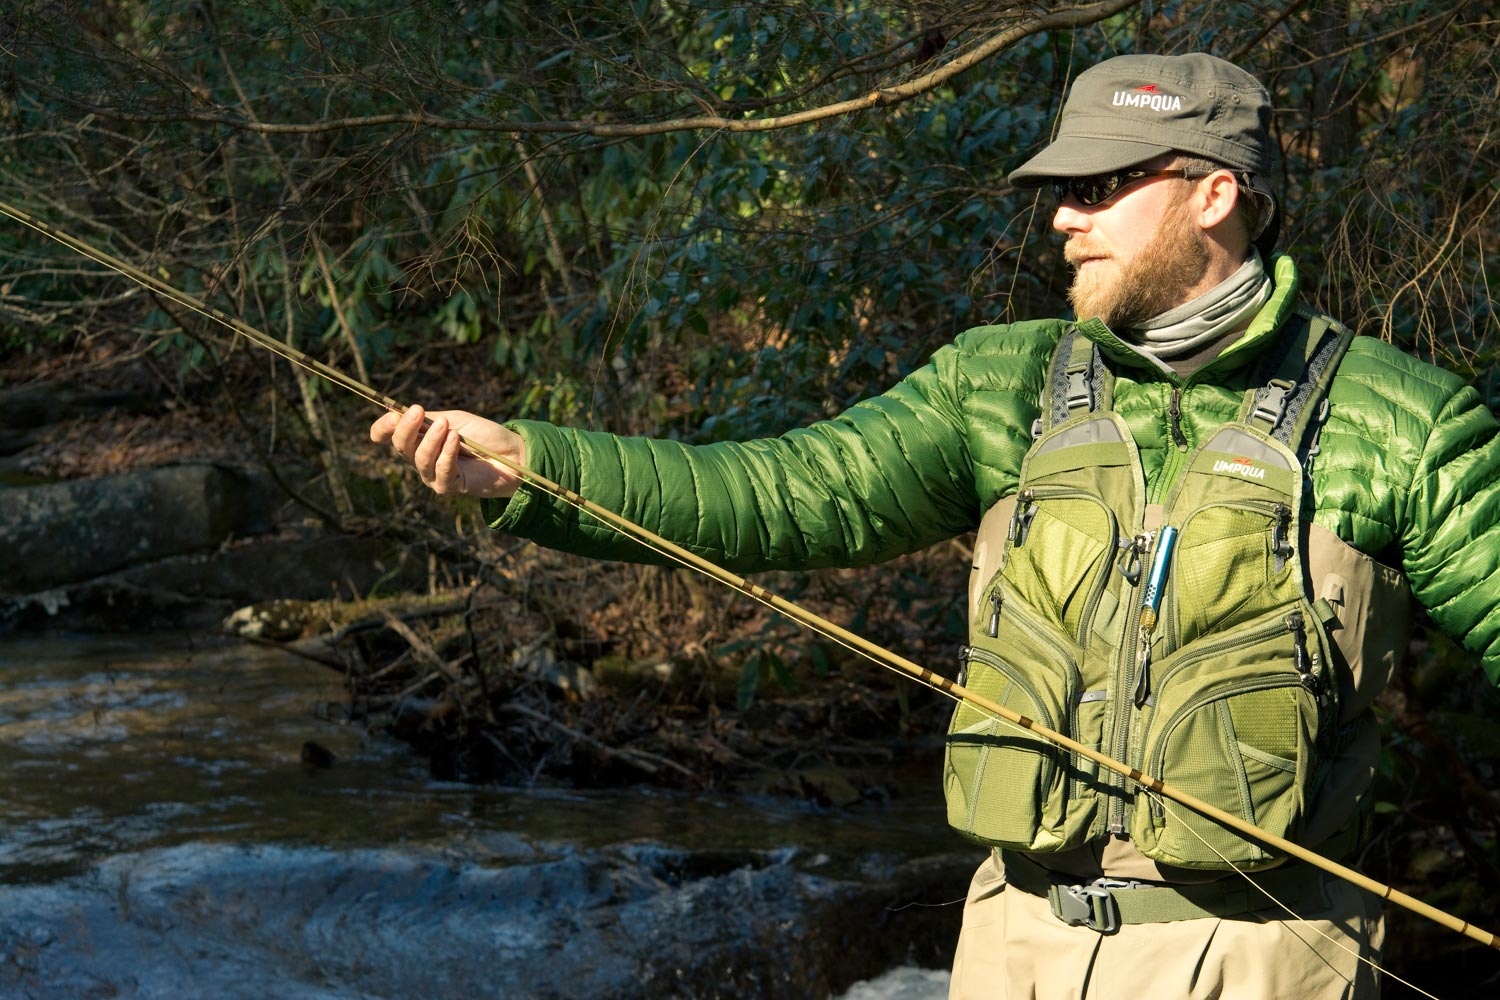 fly fishing vests - Fly Fishing, Gink and Gasoline, How to Fly Fish, Trout Fishing, Fly Tying